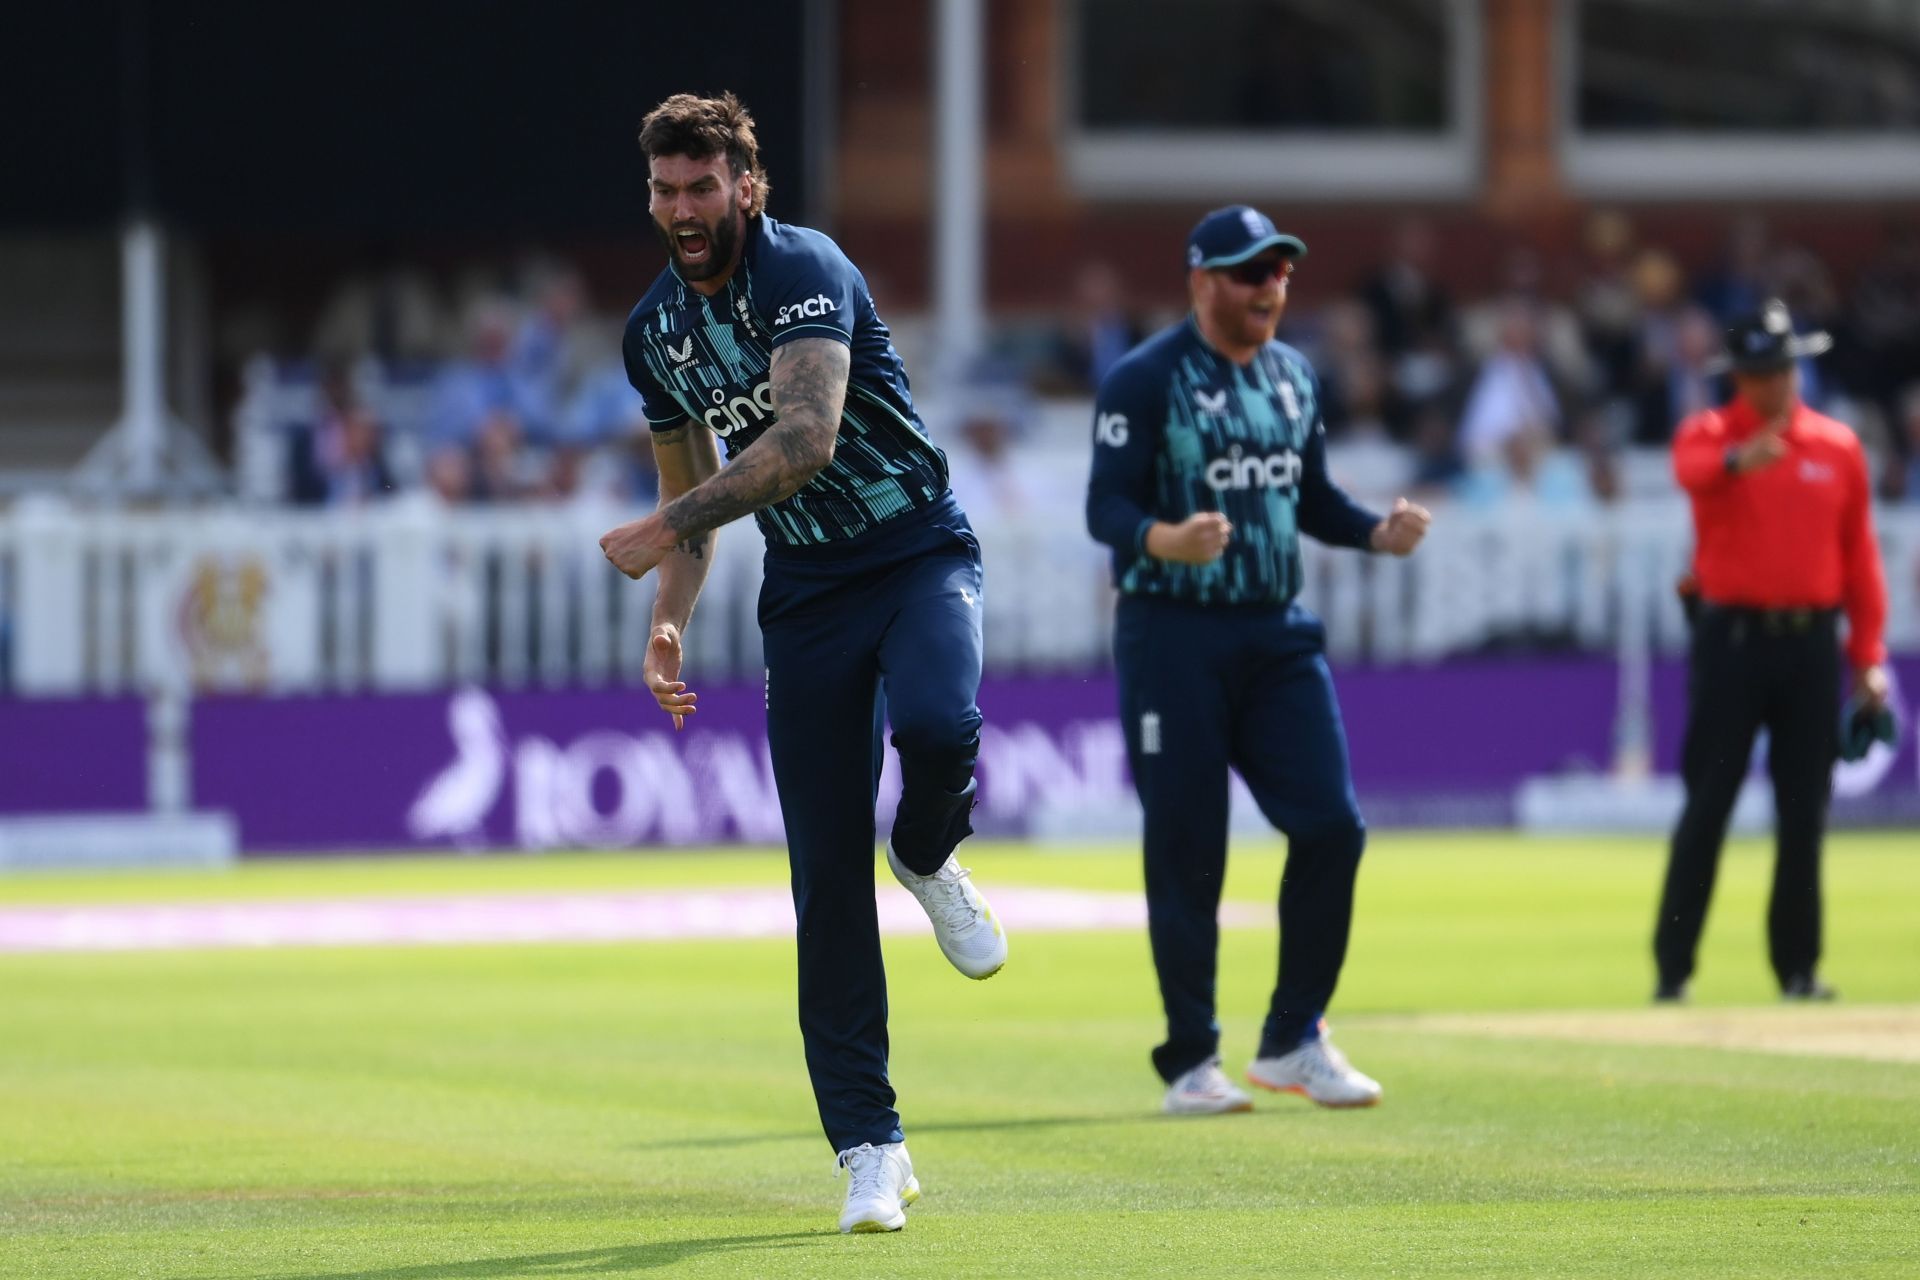 Reece Topley ran through the Indian batting lineup in the second ODI on Thursday